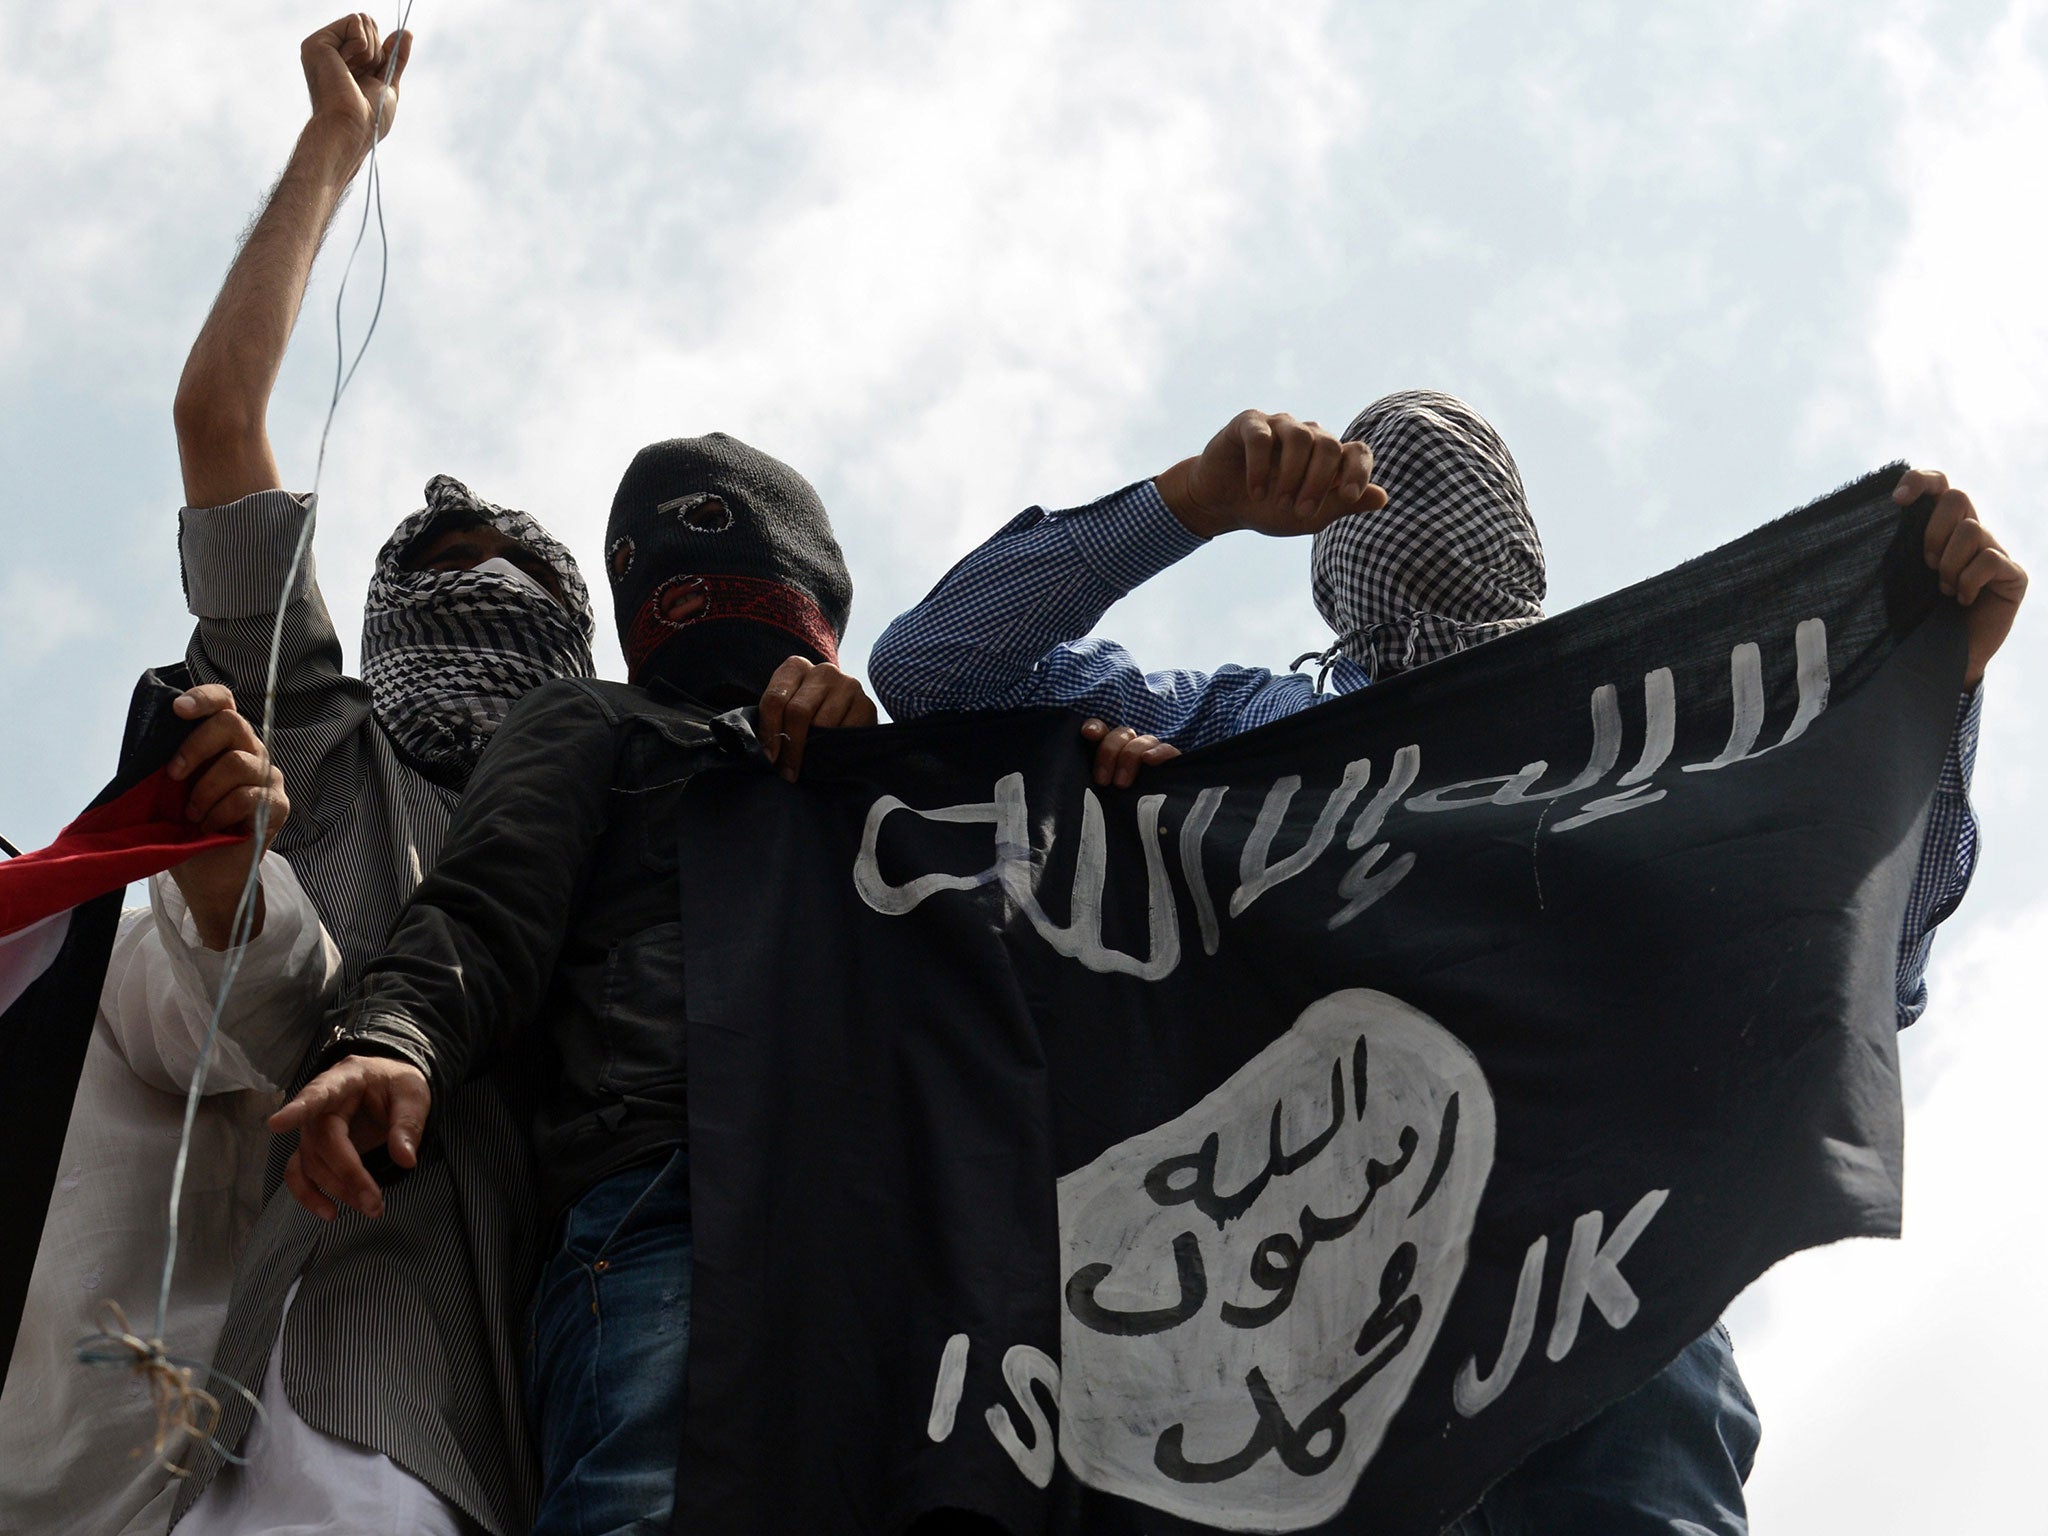 Several militant groups in Pakistan have already expressed support for Isis